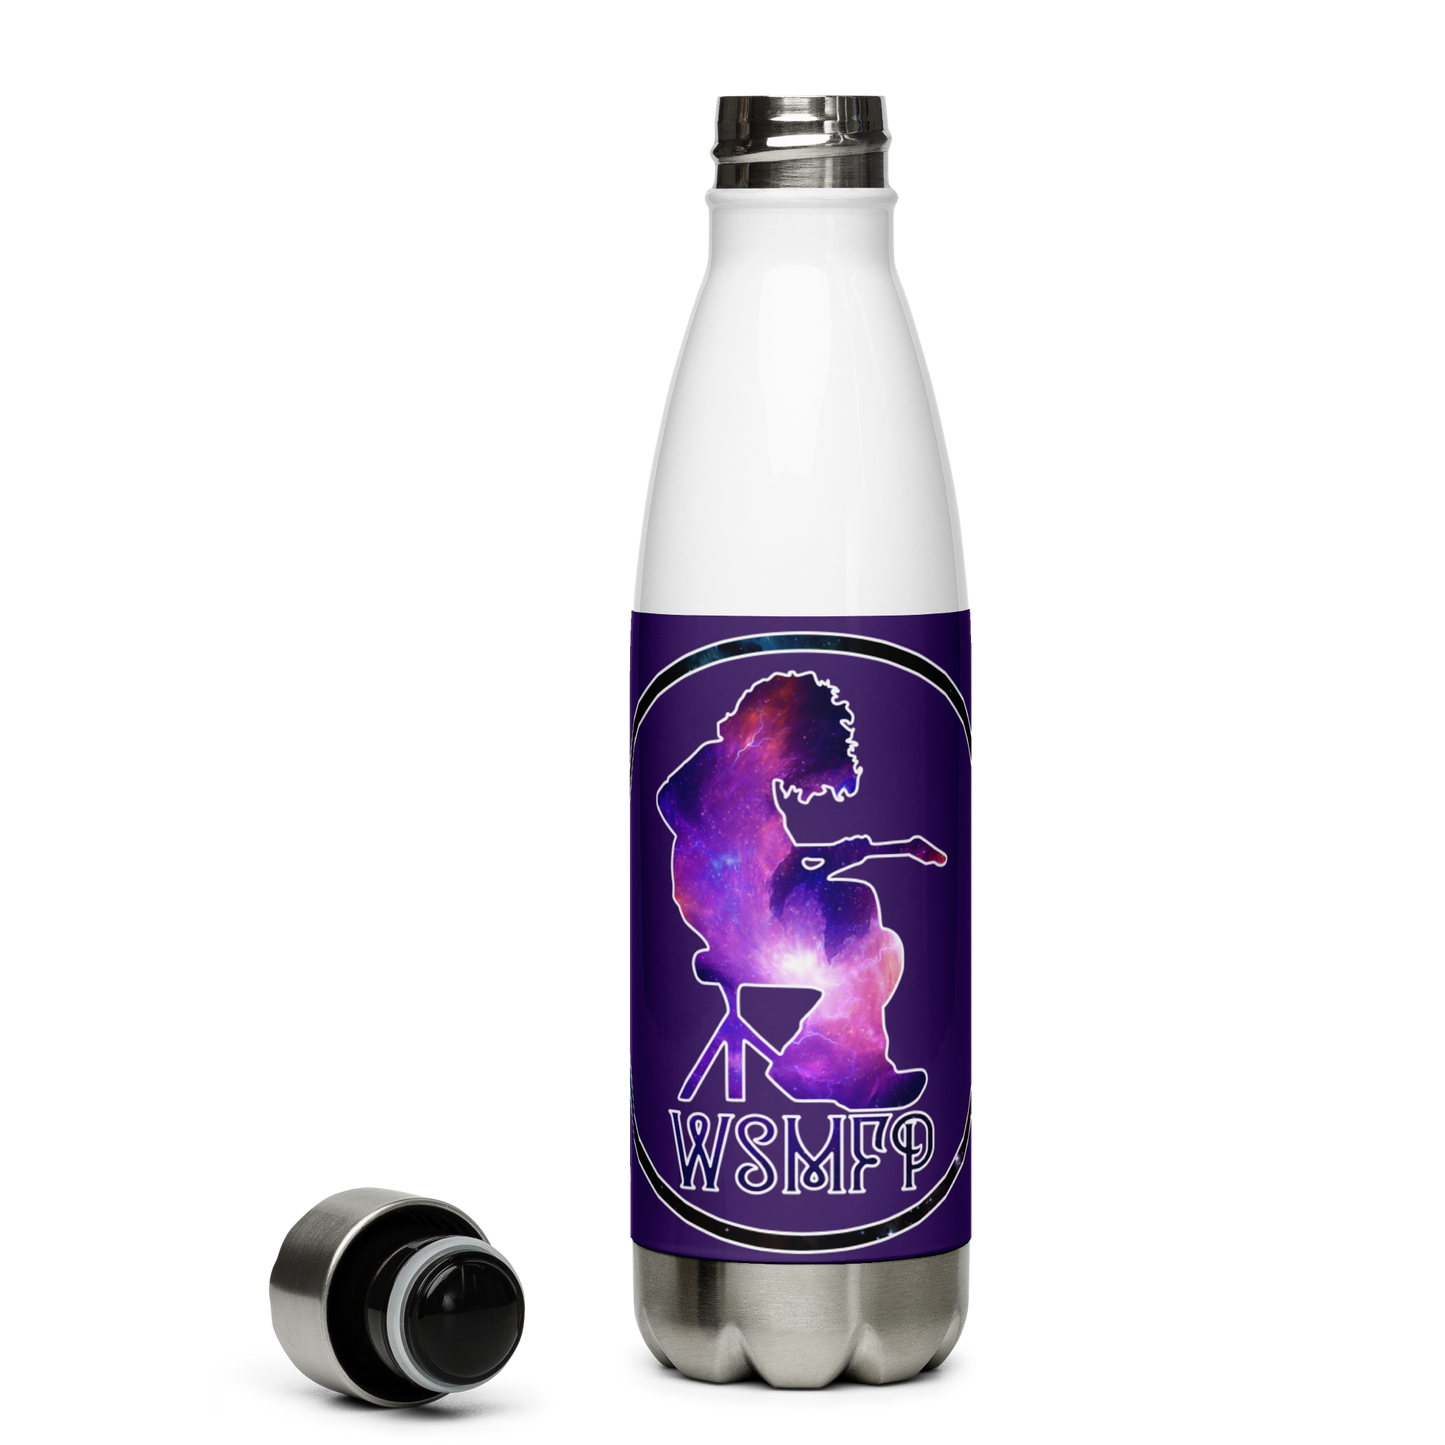 Houser WSMFP Space Stainless Steel Water Bottle 17oz | Printed Graphics